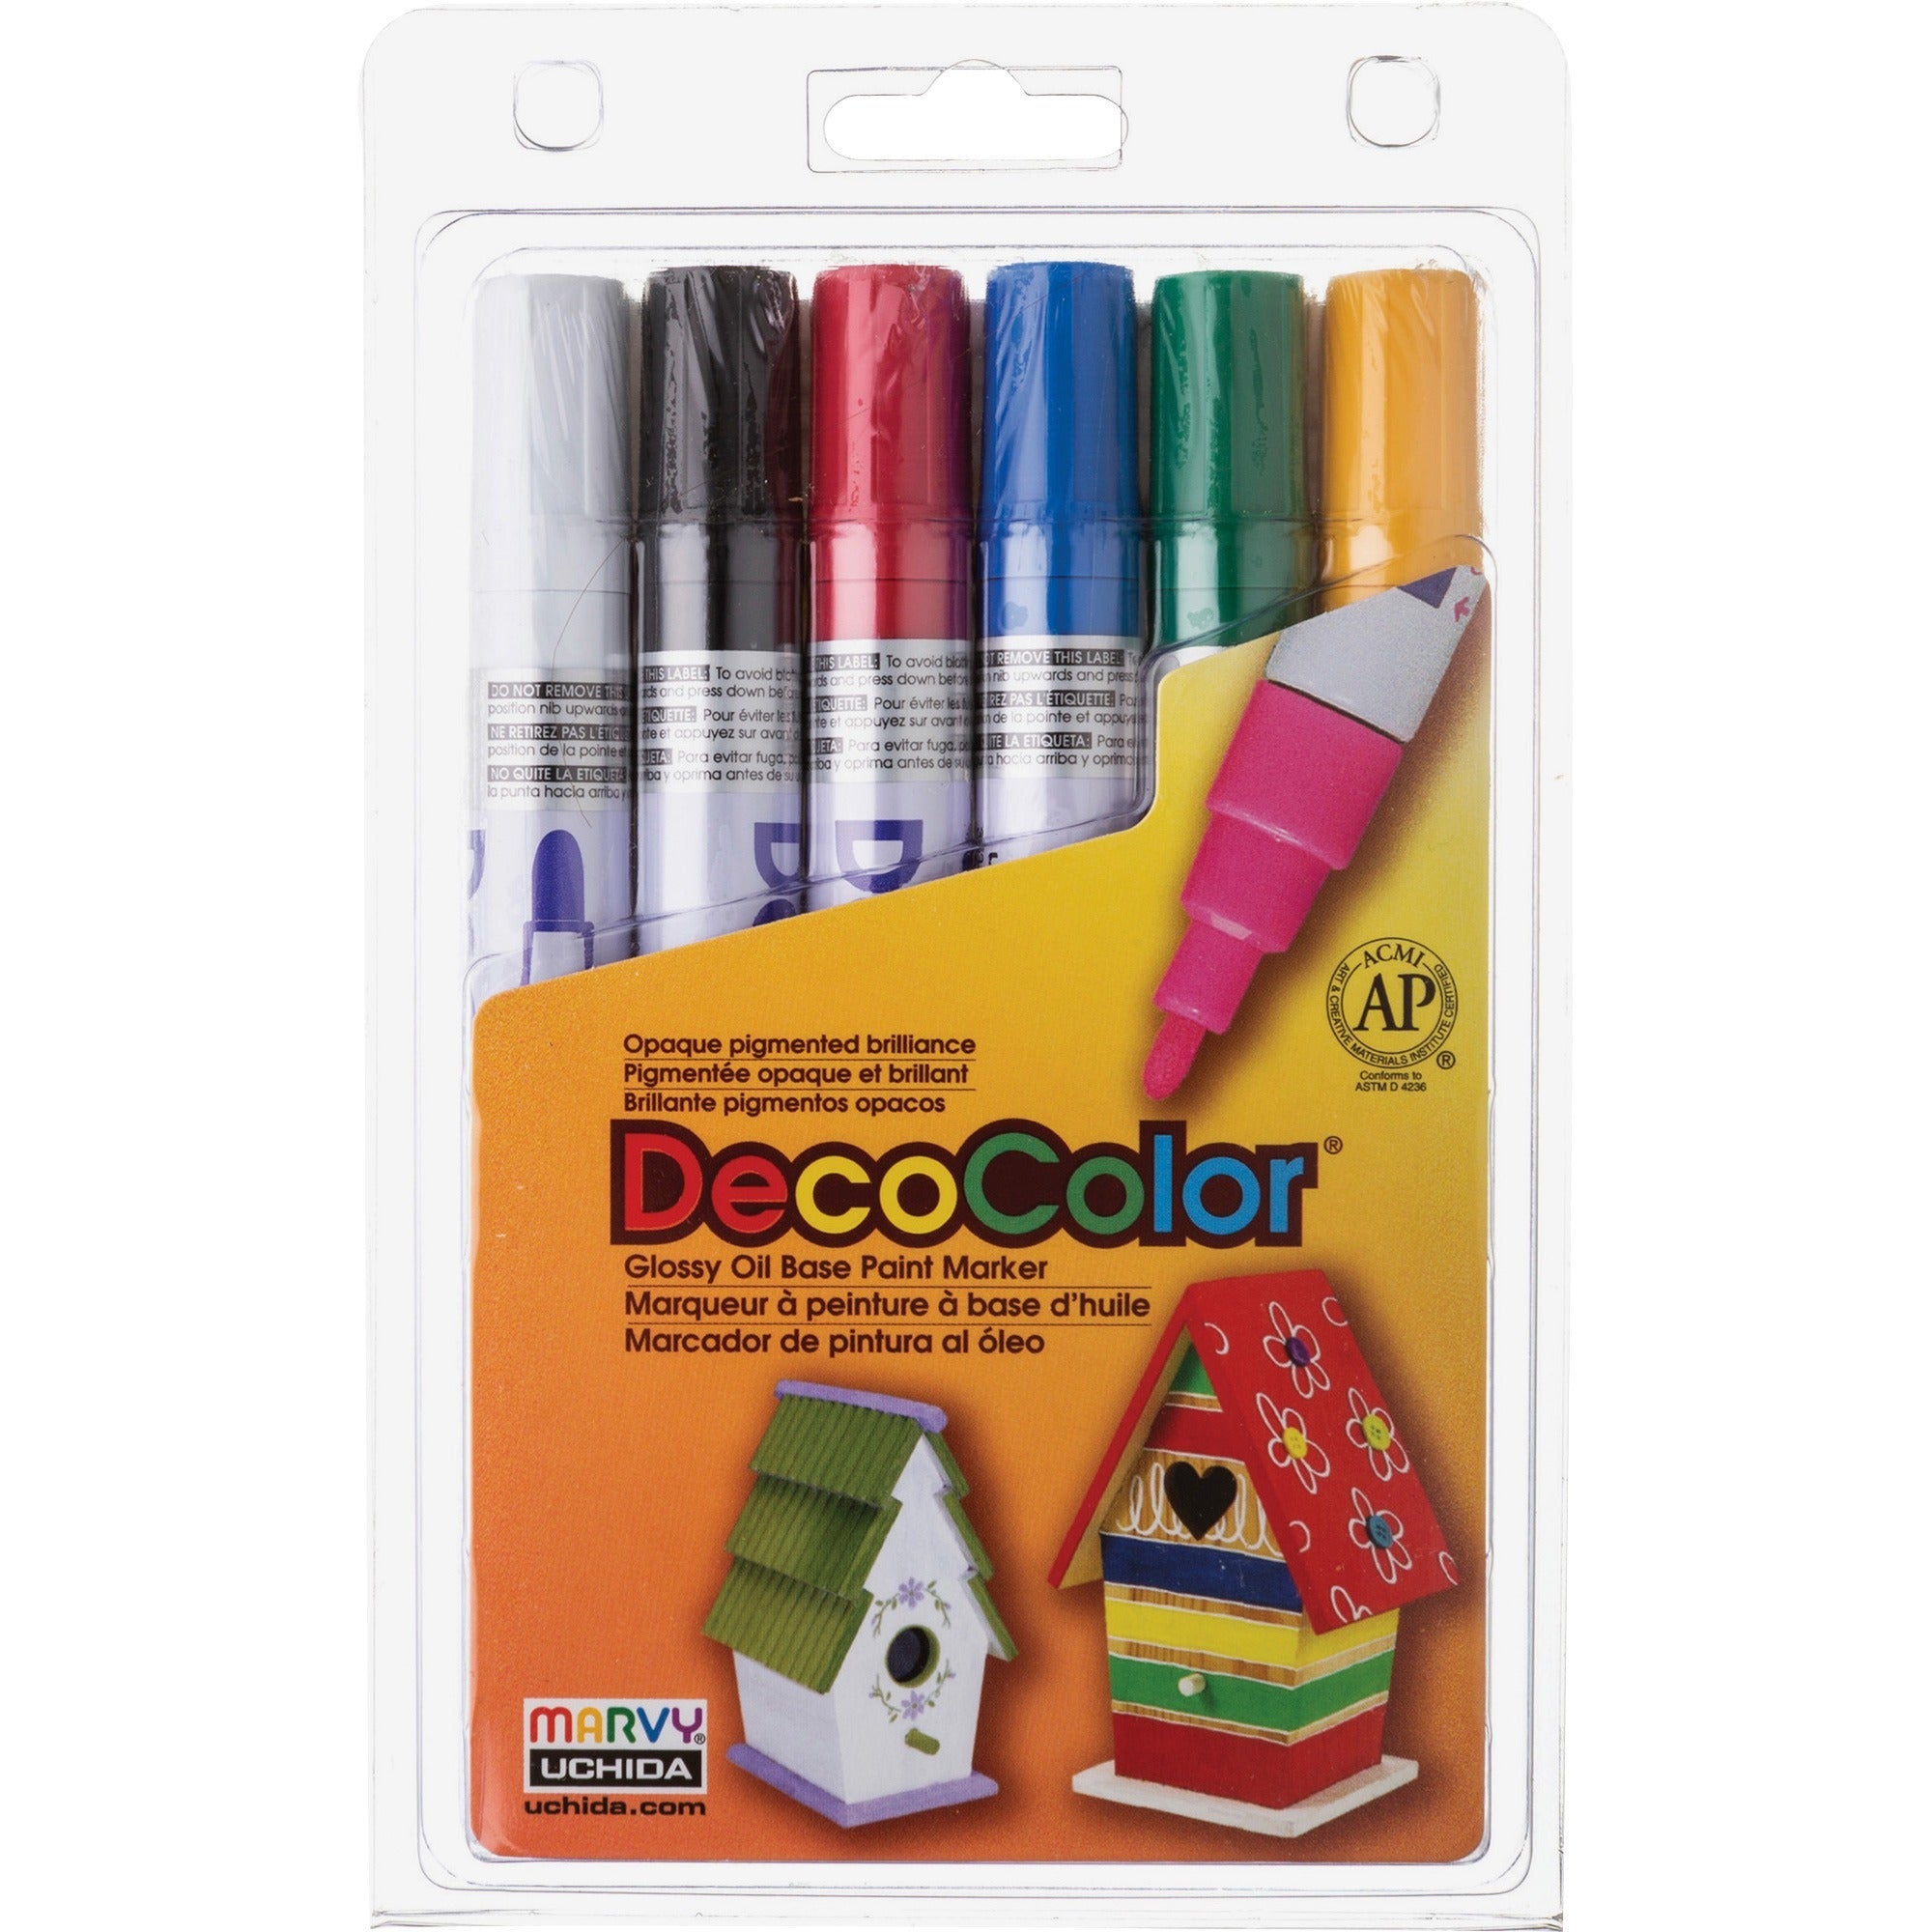 marvy-decocolor-glossy-oil-base-paint-markers-broad-marker-point-white-black-red-blue-green-yellow-oil-based-pigment-based-ink-6-set_uch3006a - 1